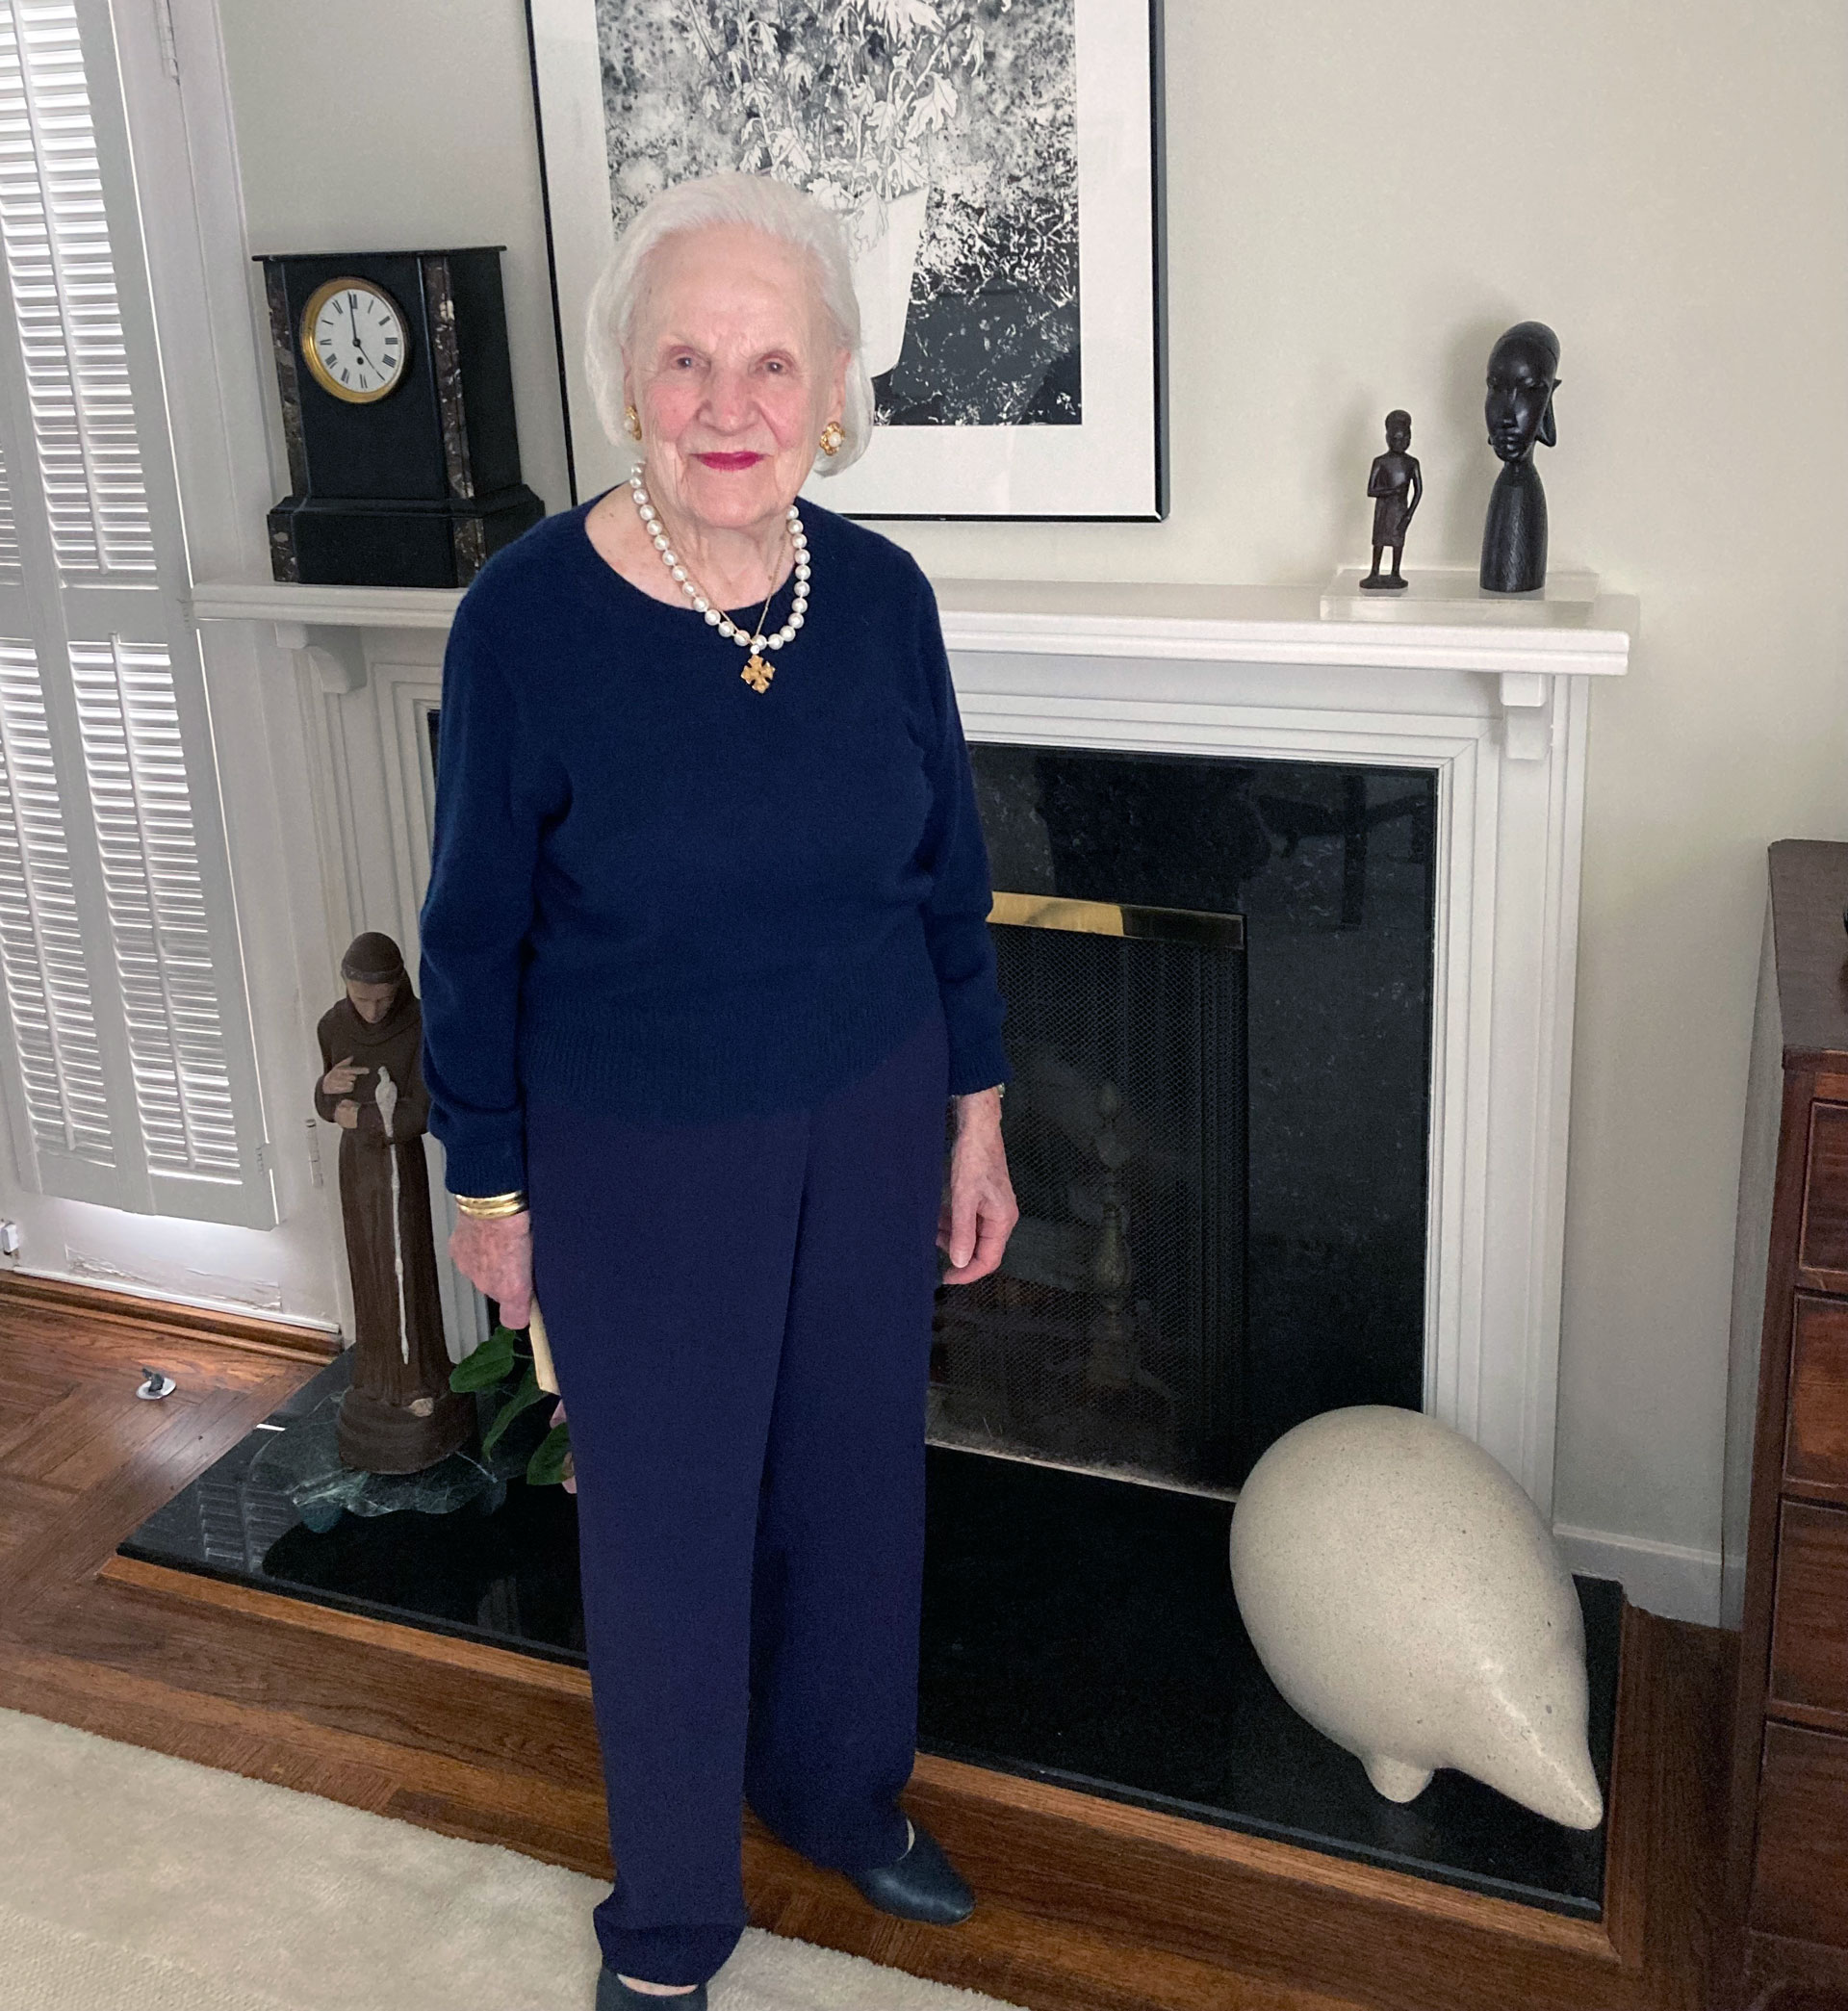 Older woman in a navy blue pants suit poses by a fireplace.